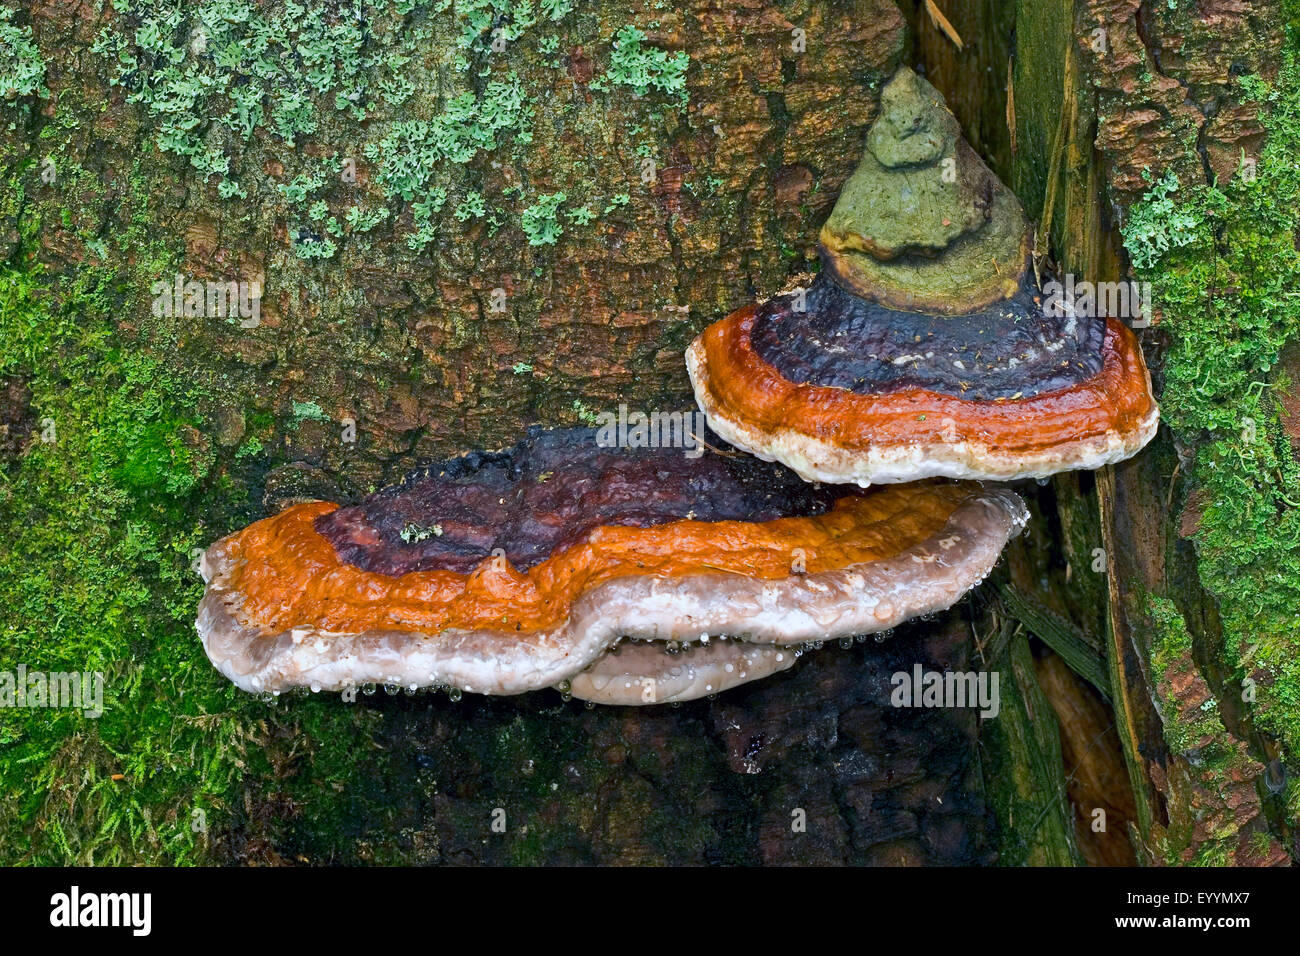 Red Banded Polypore, Red-banded Polypore, Red belted Bracket, Red-belted Bracket (Fomitopsis pinicola, Fomes pinicola, Fomes marginatus), fruiting bodies at a tree trunk, Germany Stock Photo